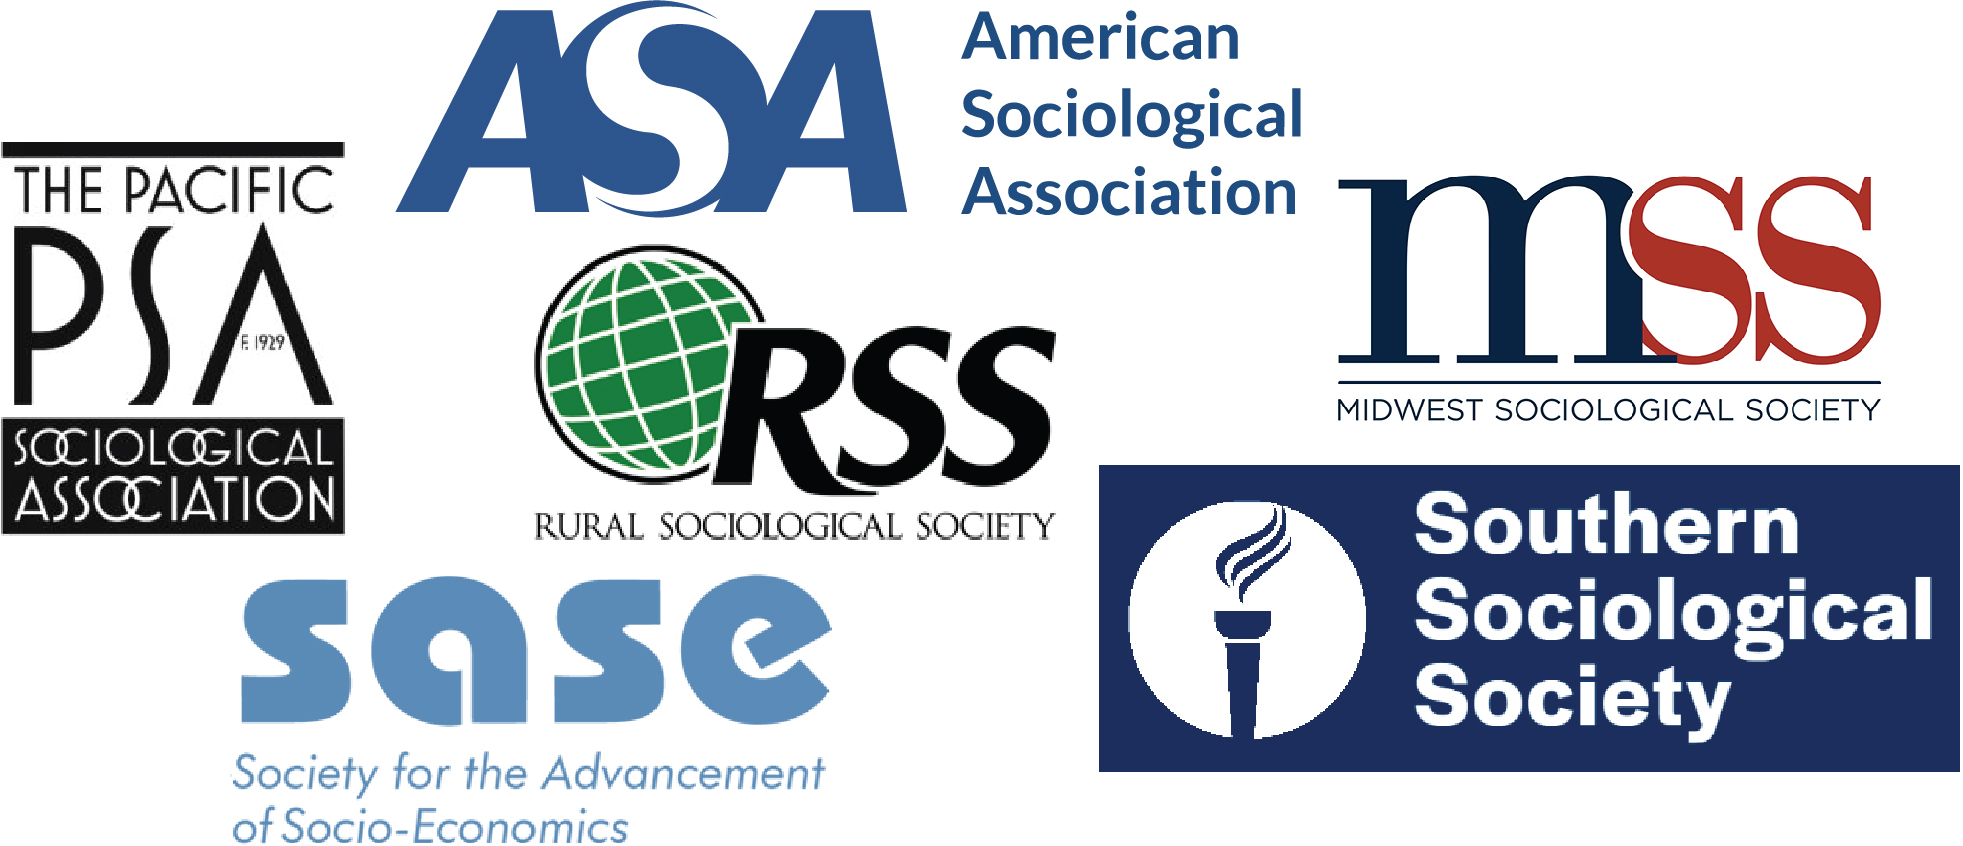 Collage of logos of the professional associations described below